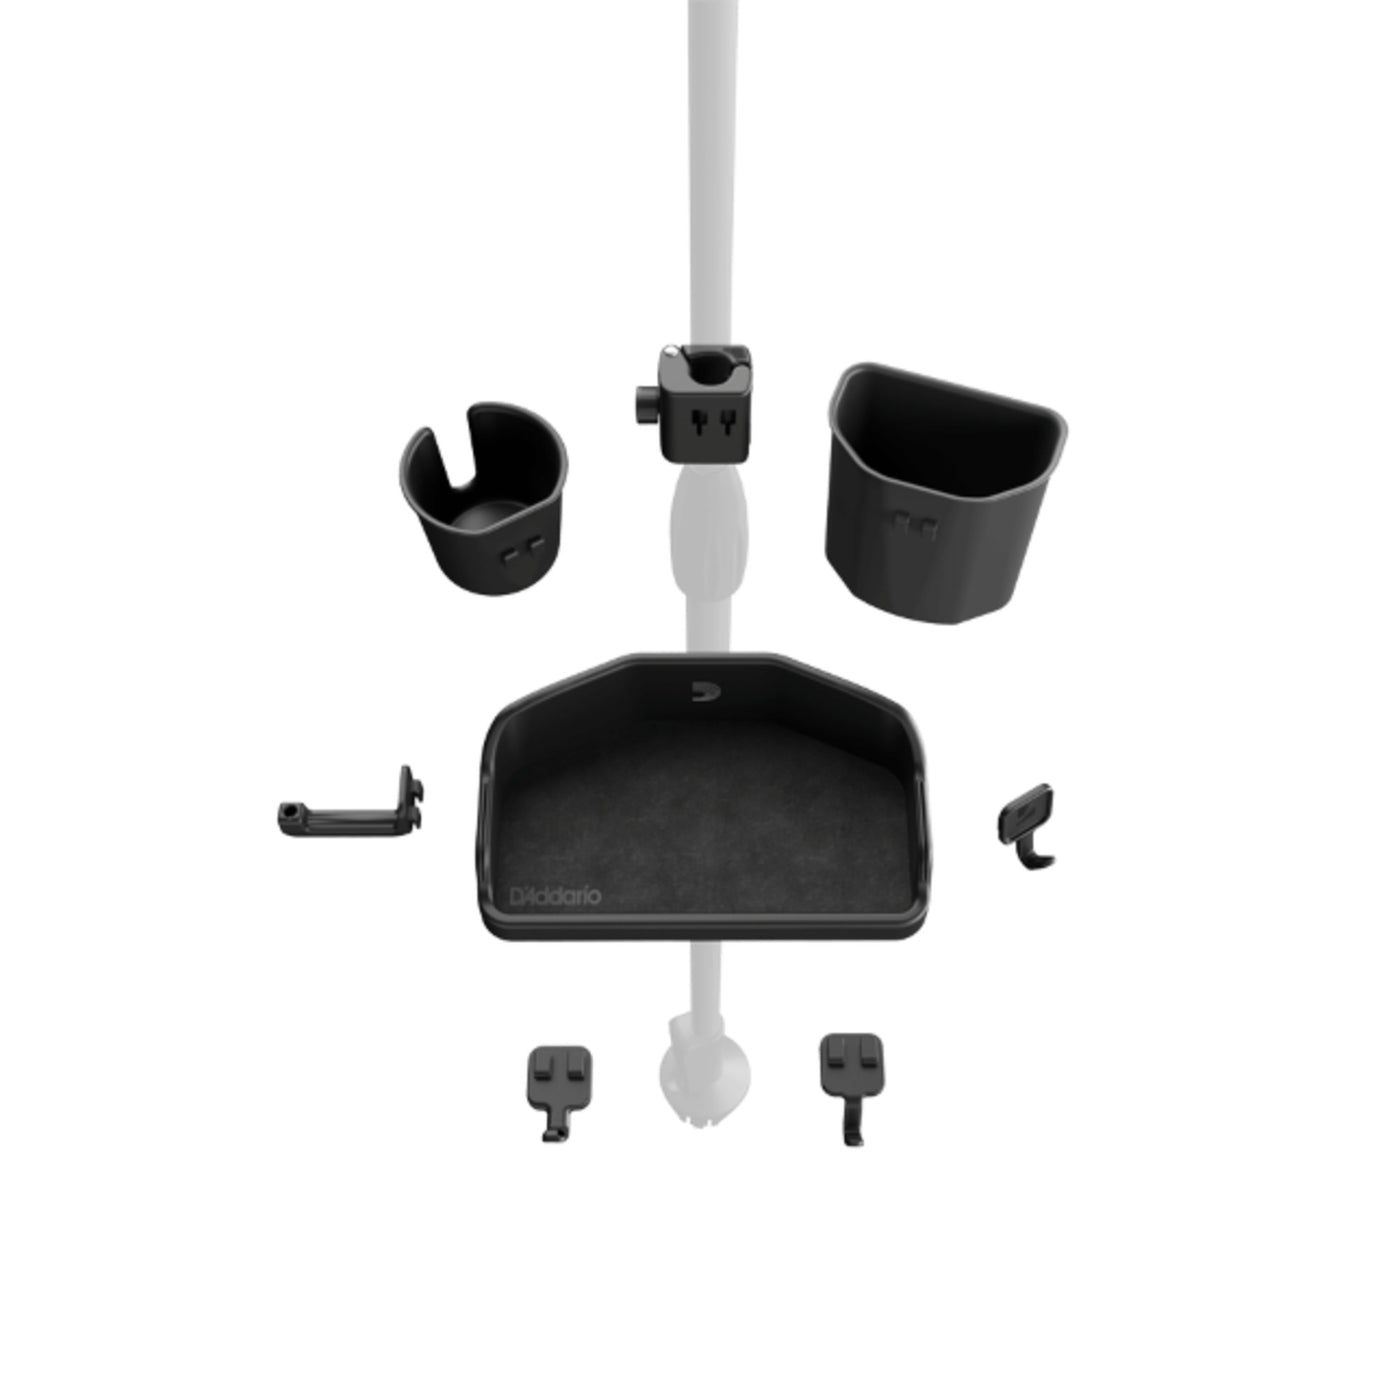 D'Addario Mic Stand Accessory System - Starter Kit (PW-MSASSK-01)